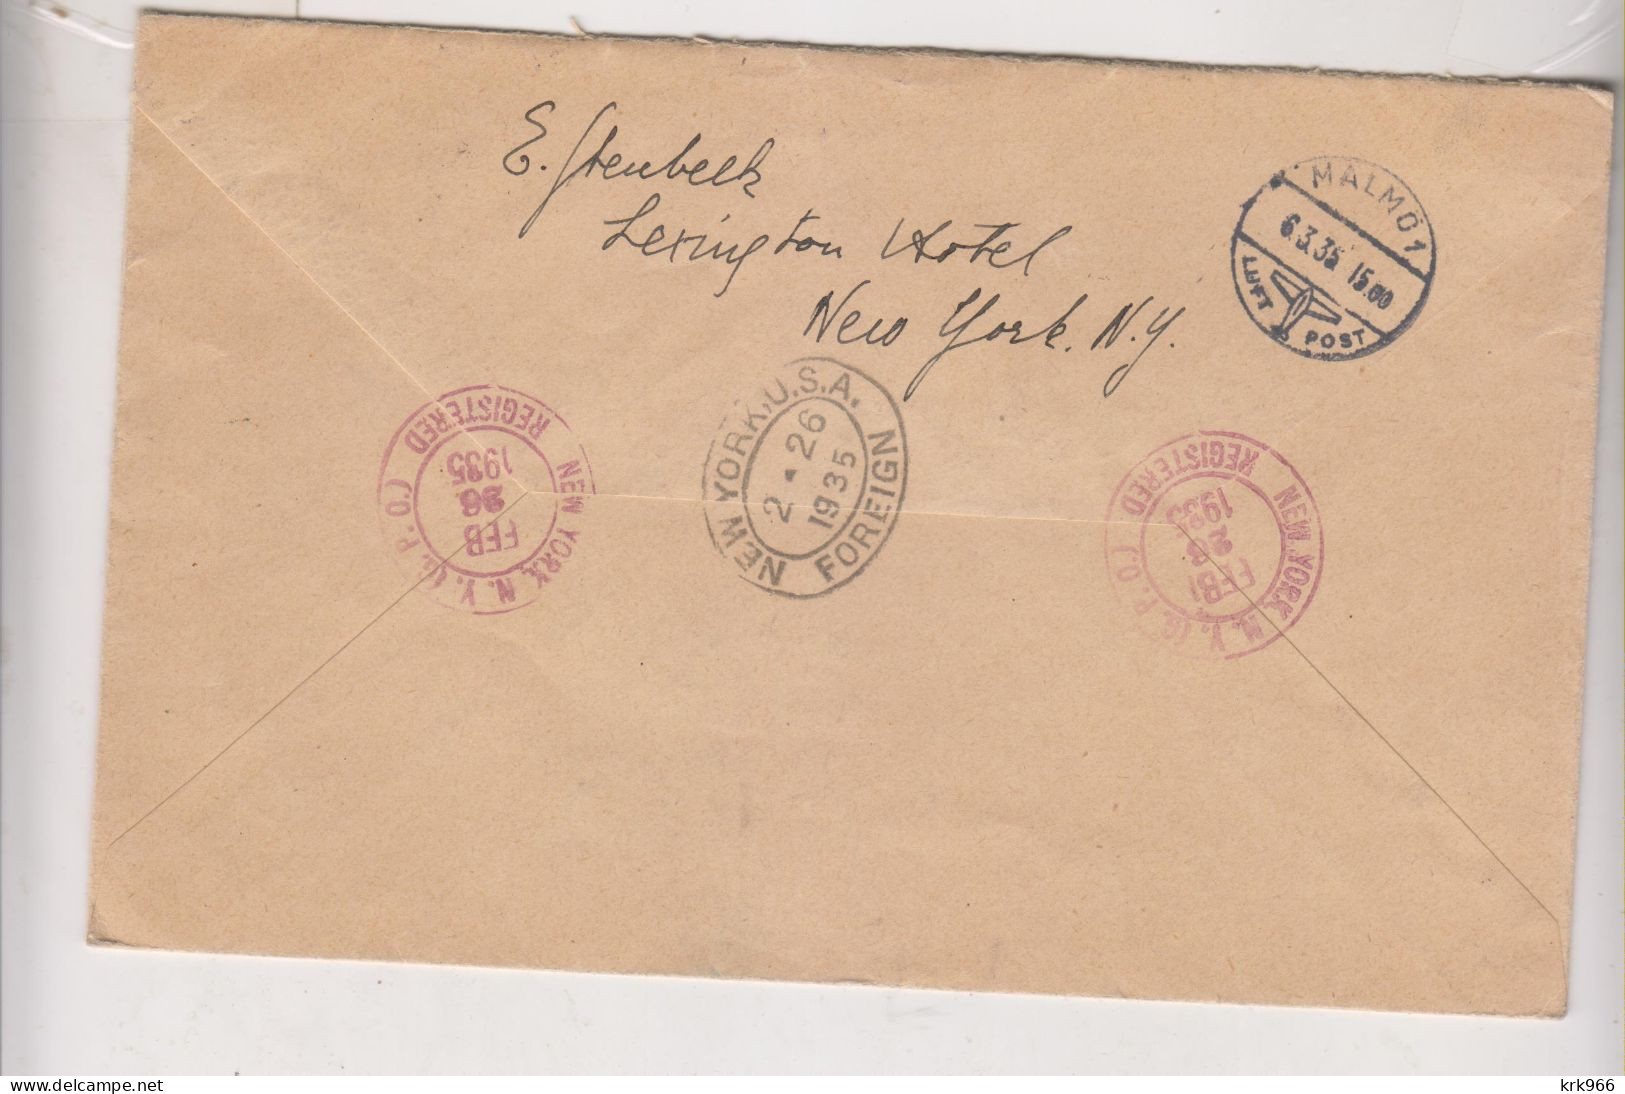 UNITED STATES 1935 NEW YORK Registered Airmail Cover To SWEDEN Special Delivery - 1c. 1918-1940 Lettres